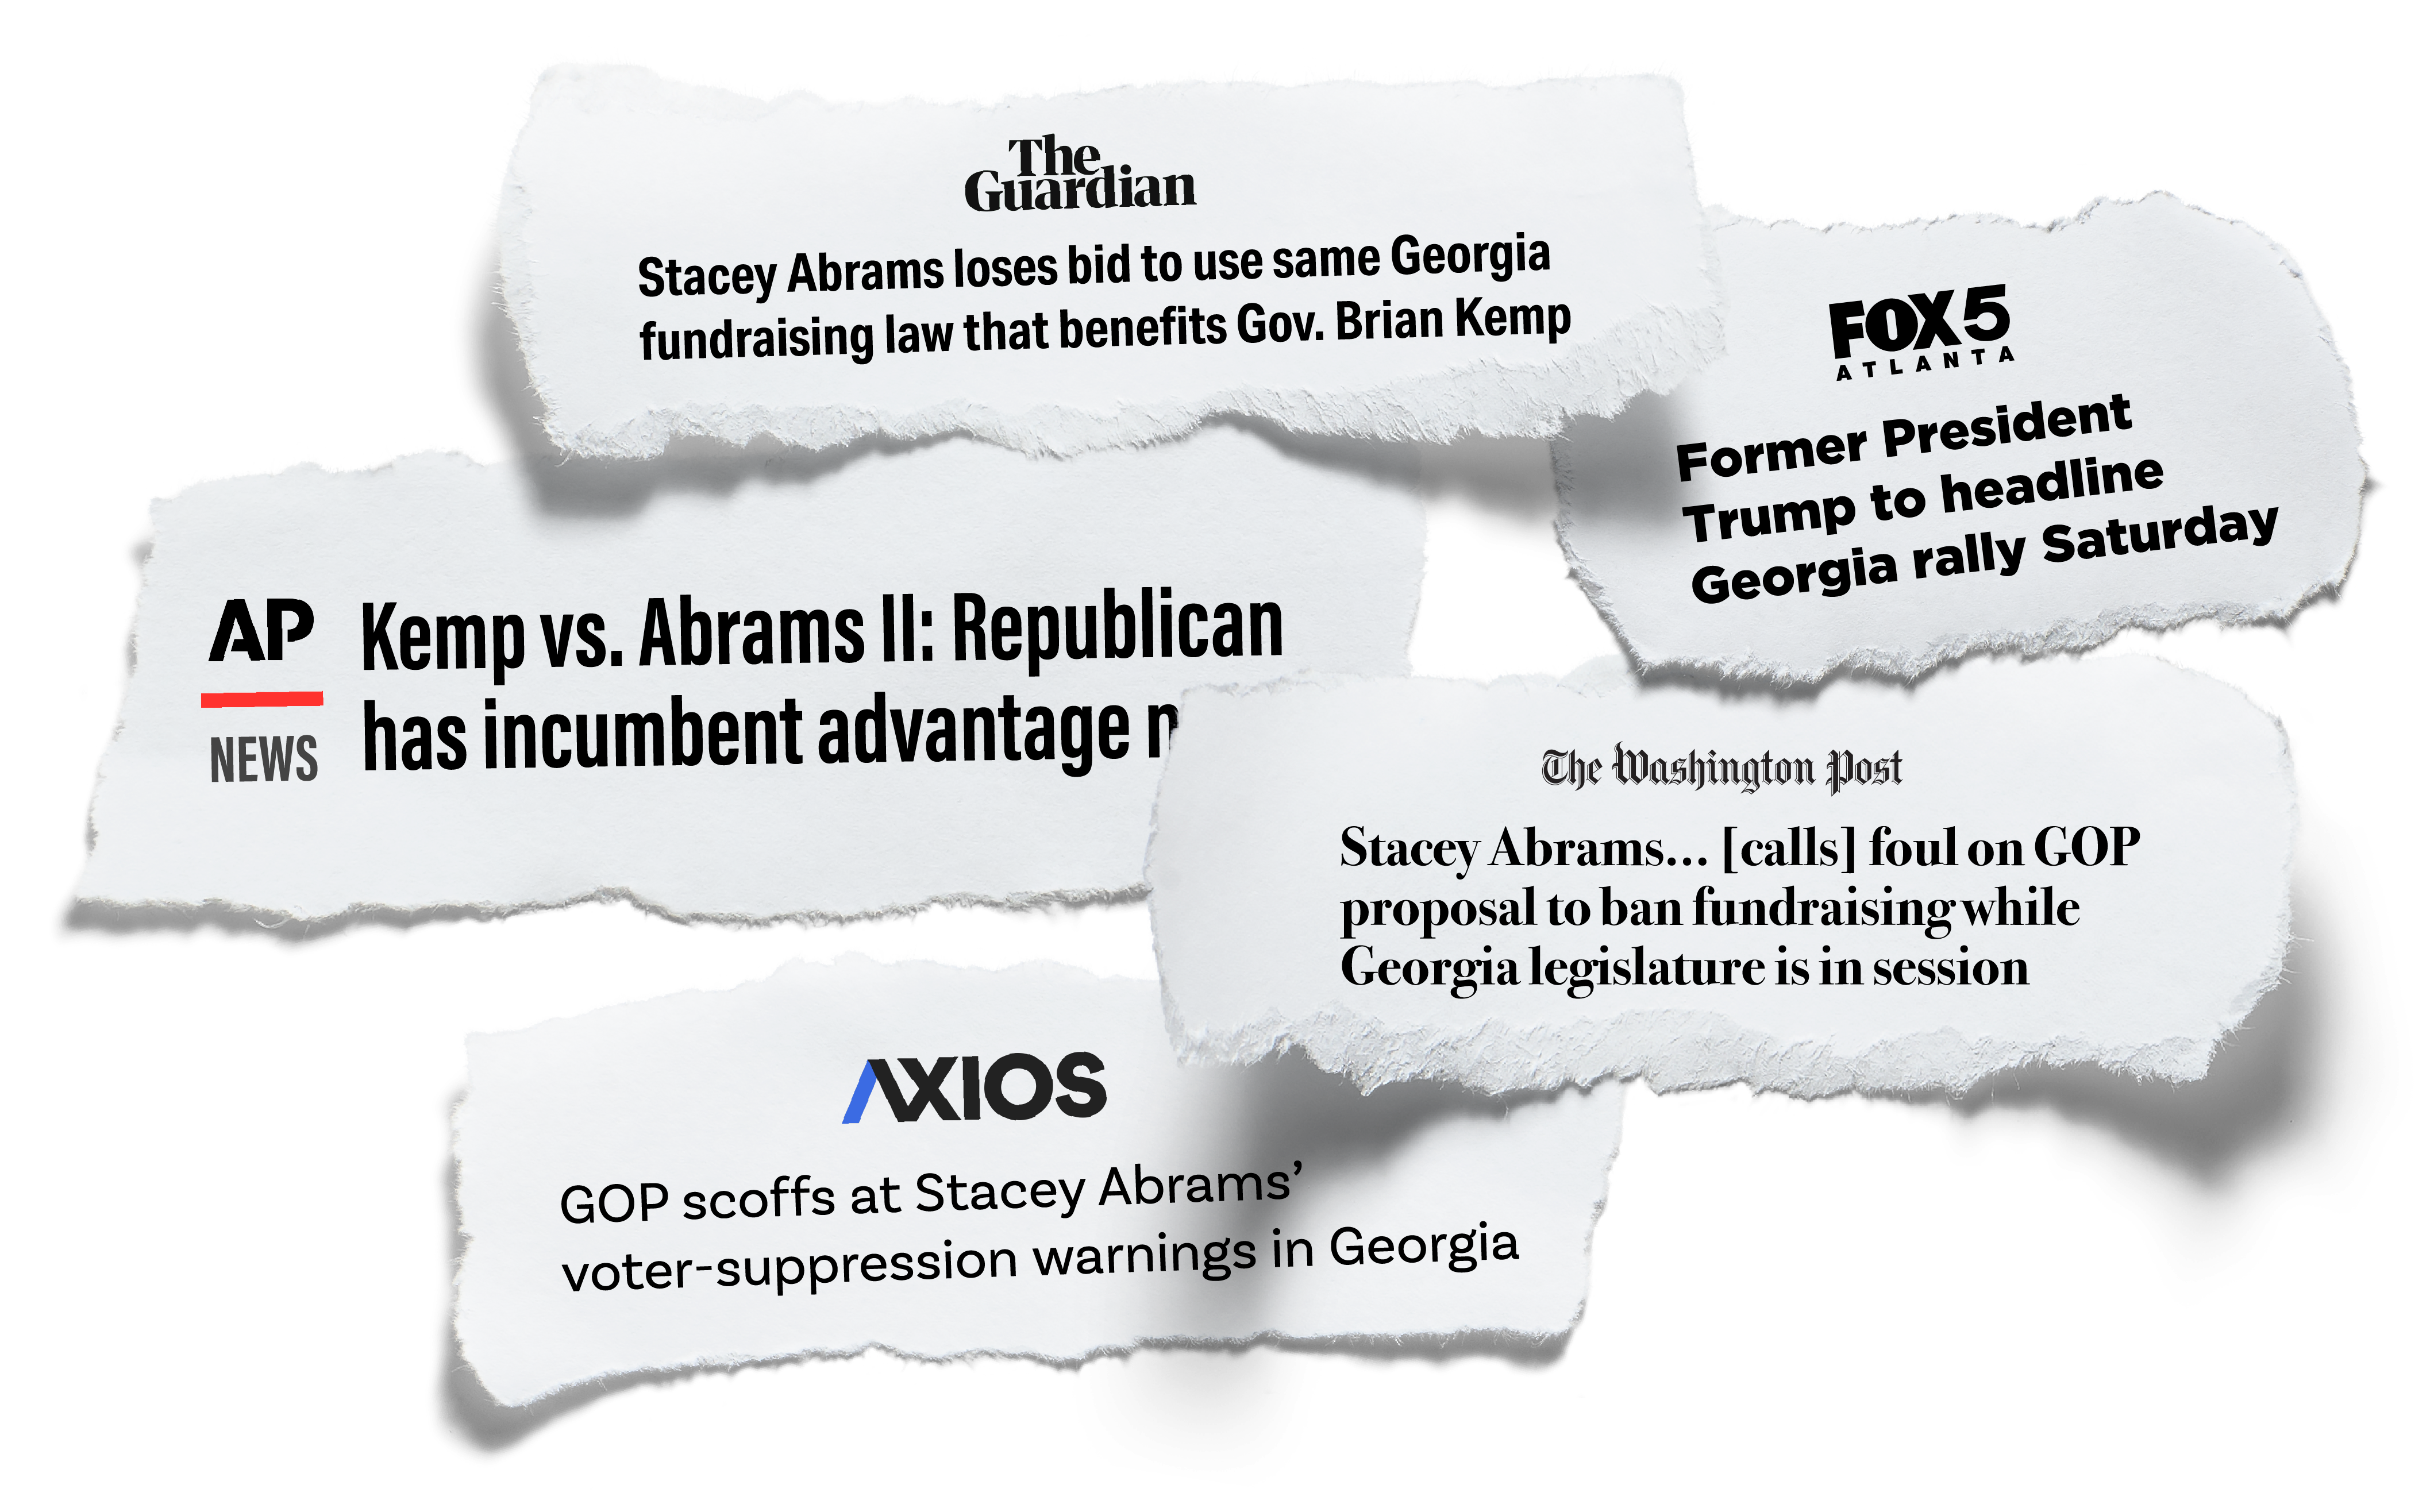 News headlines about Stacey Abrams